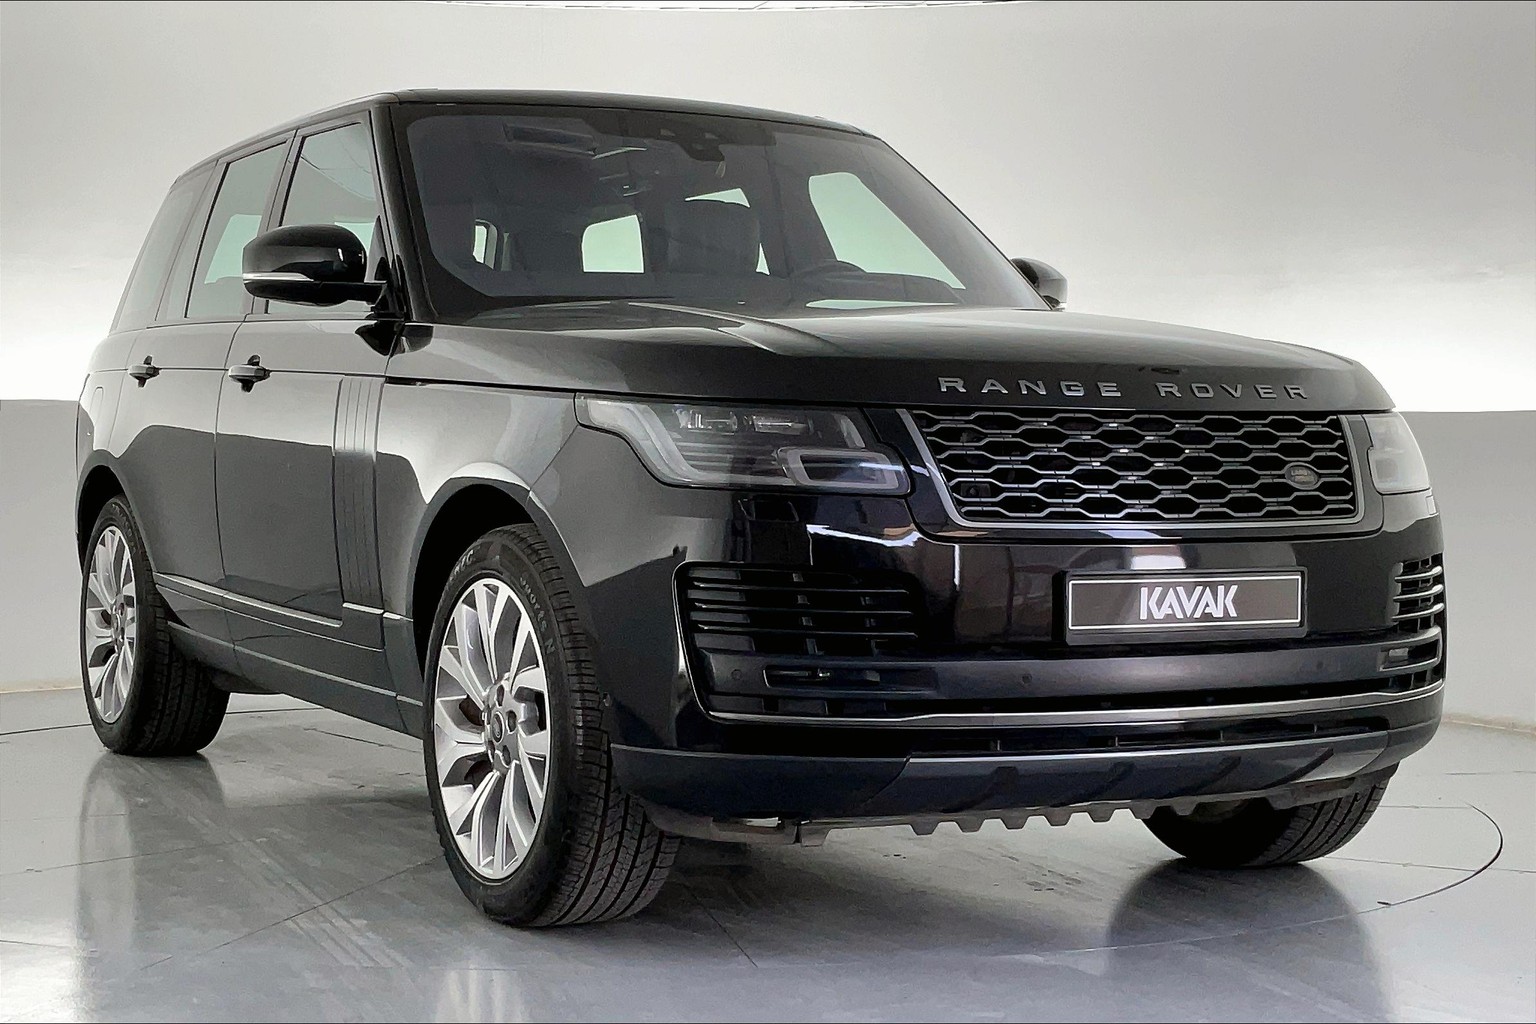 Used Land Rover Lr4 2012 Price In Uae, Specs And Reviews For Dubai, Abu  Dhabi And Sharjah | Drive Arabia